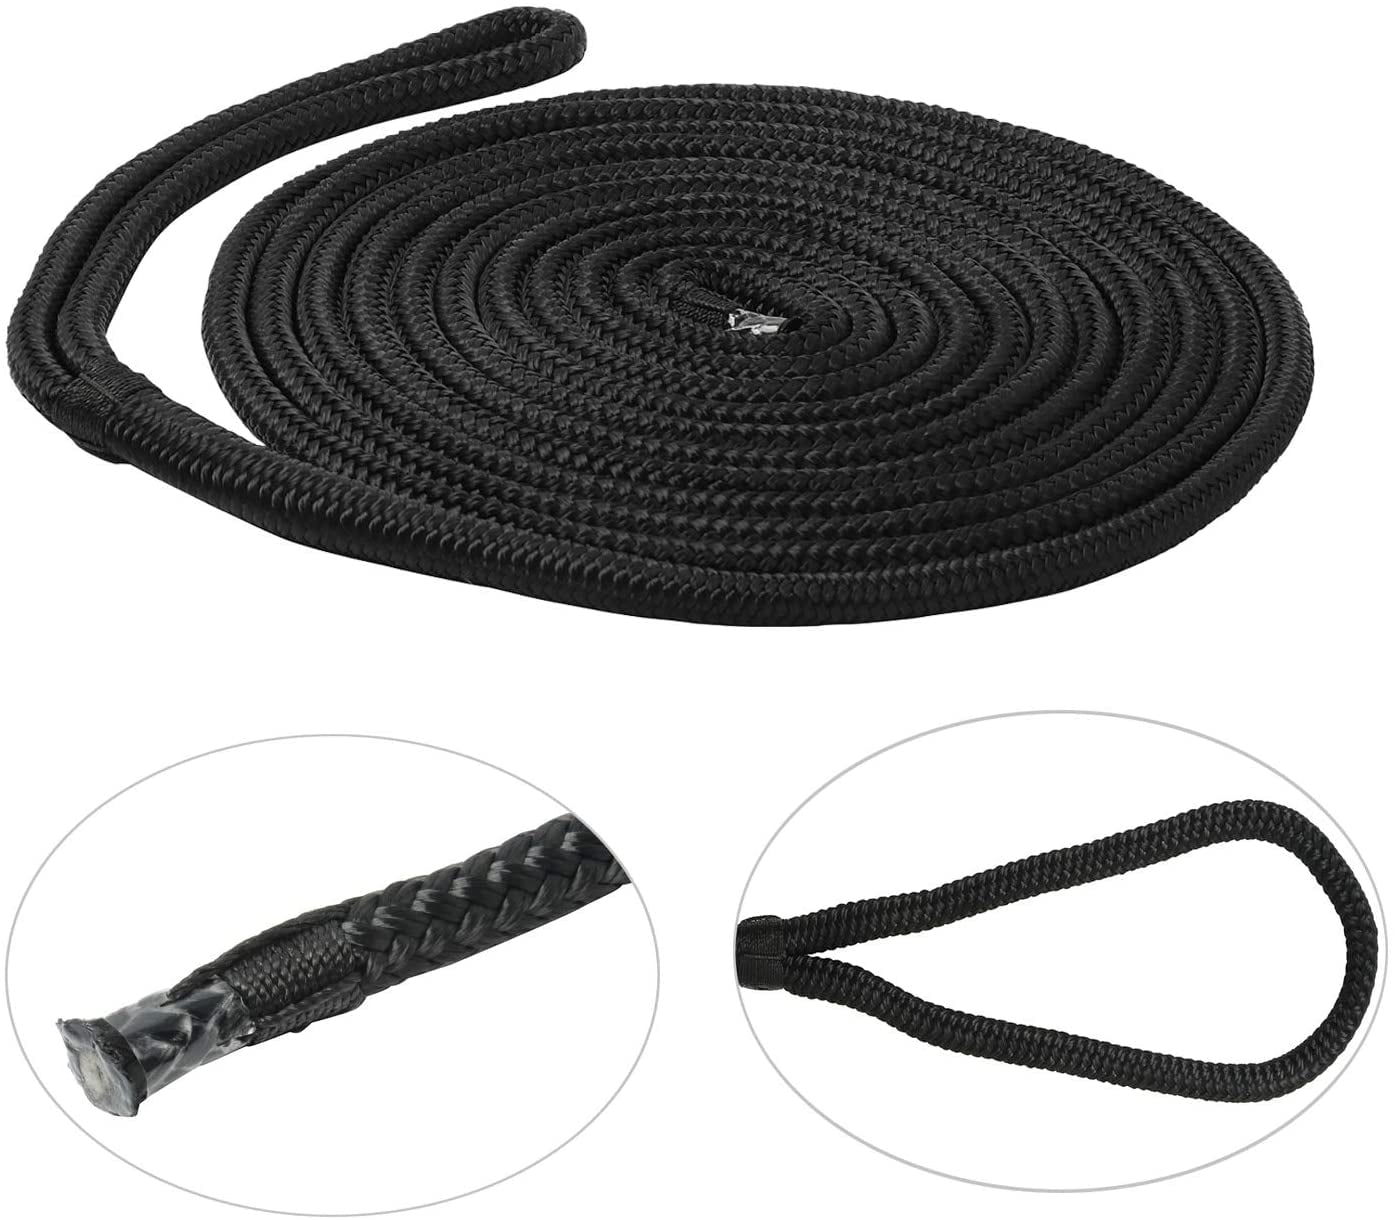 NovelBee 5/8 Inch Double Braid Nylon Rope with 3/8 Inch x 20 Feet Galvanized Chain for Boat Anchor Rope and Dock Line 